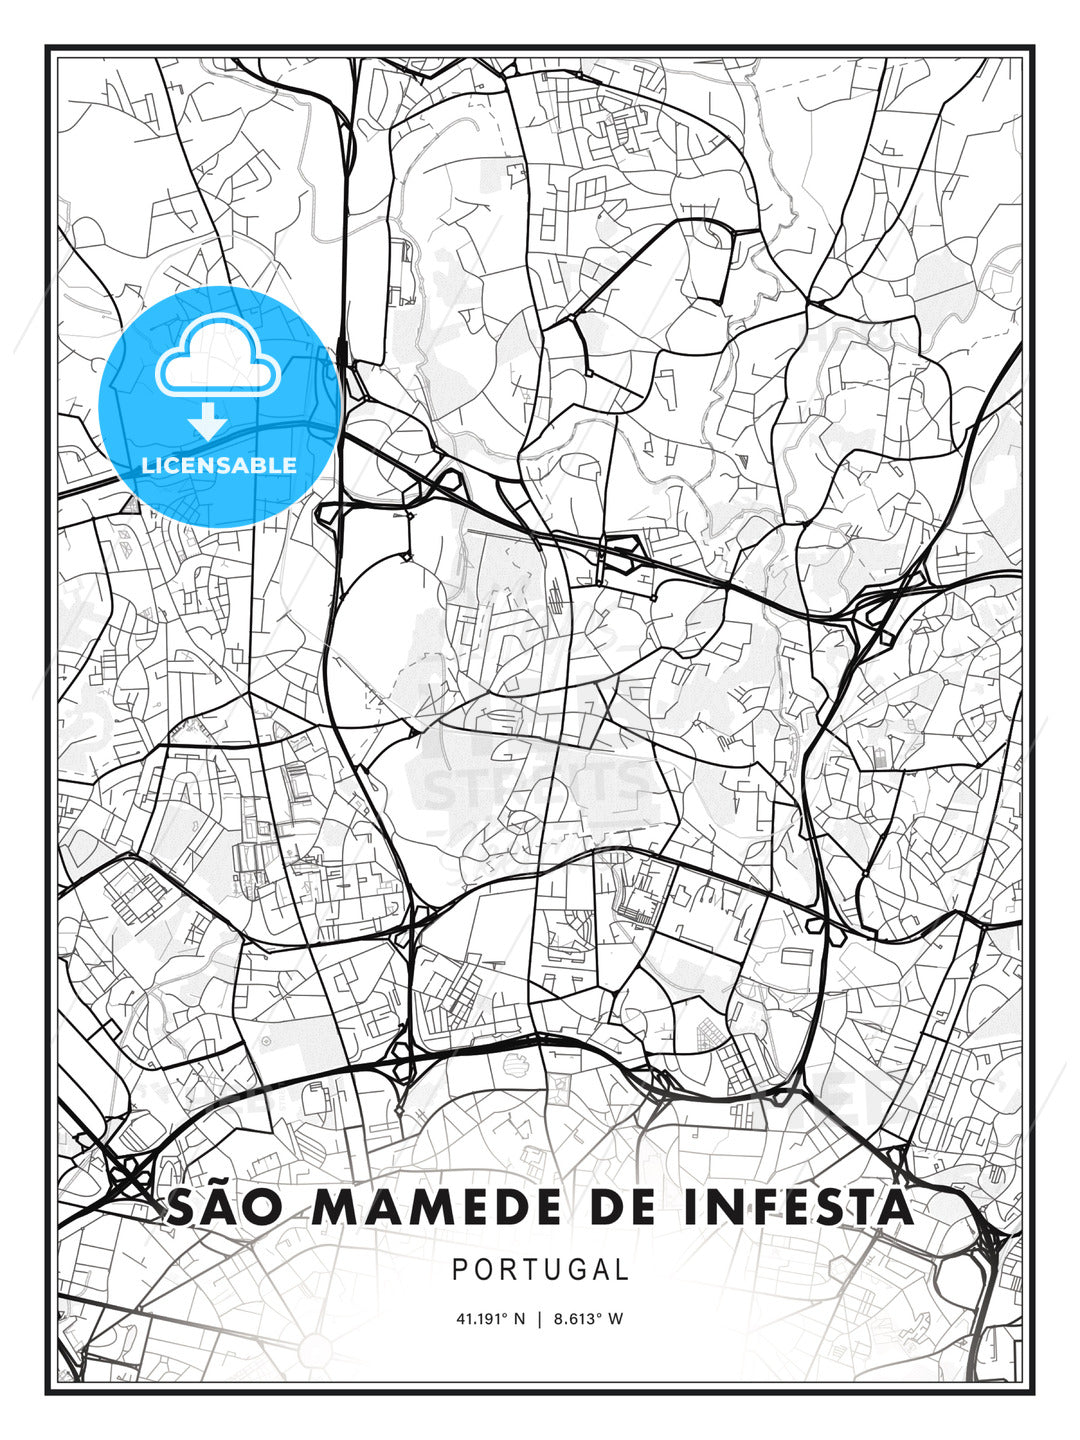 São Mamede de Infesta, Portugal, Modern Print Template in Various Formats - HEBSTREITS Sketches